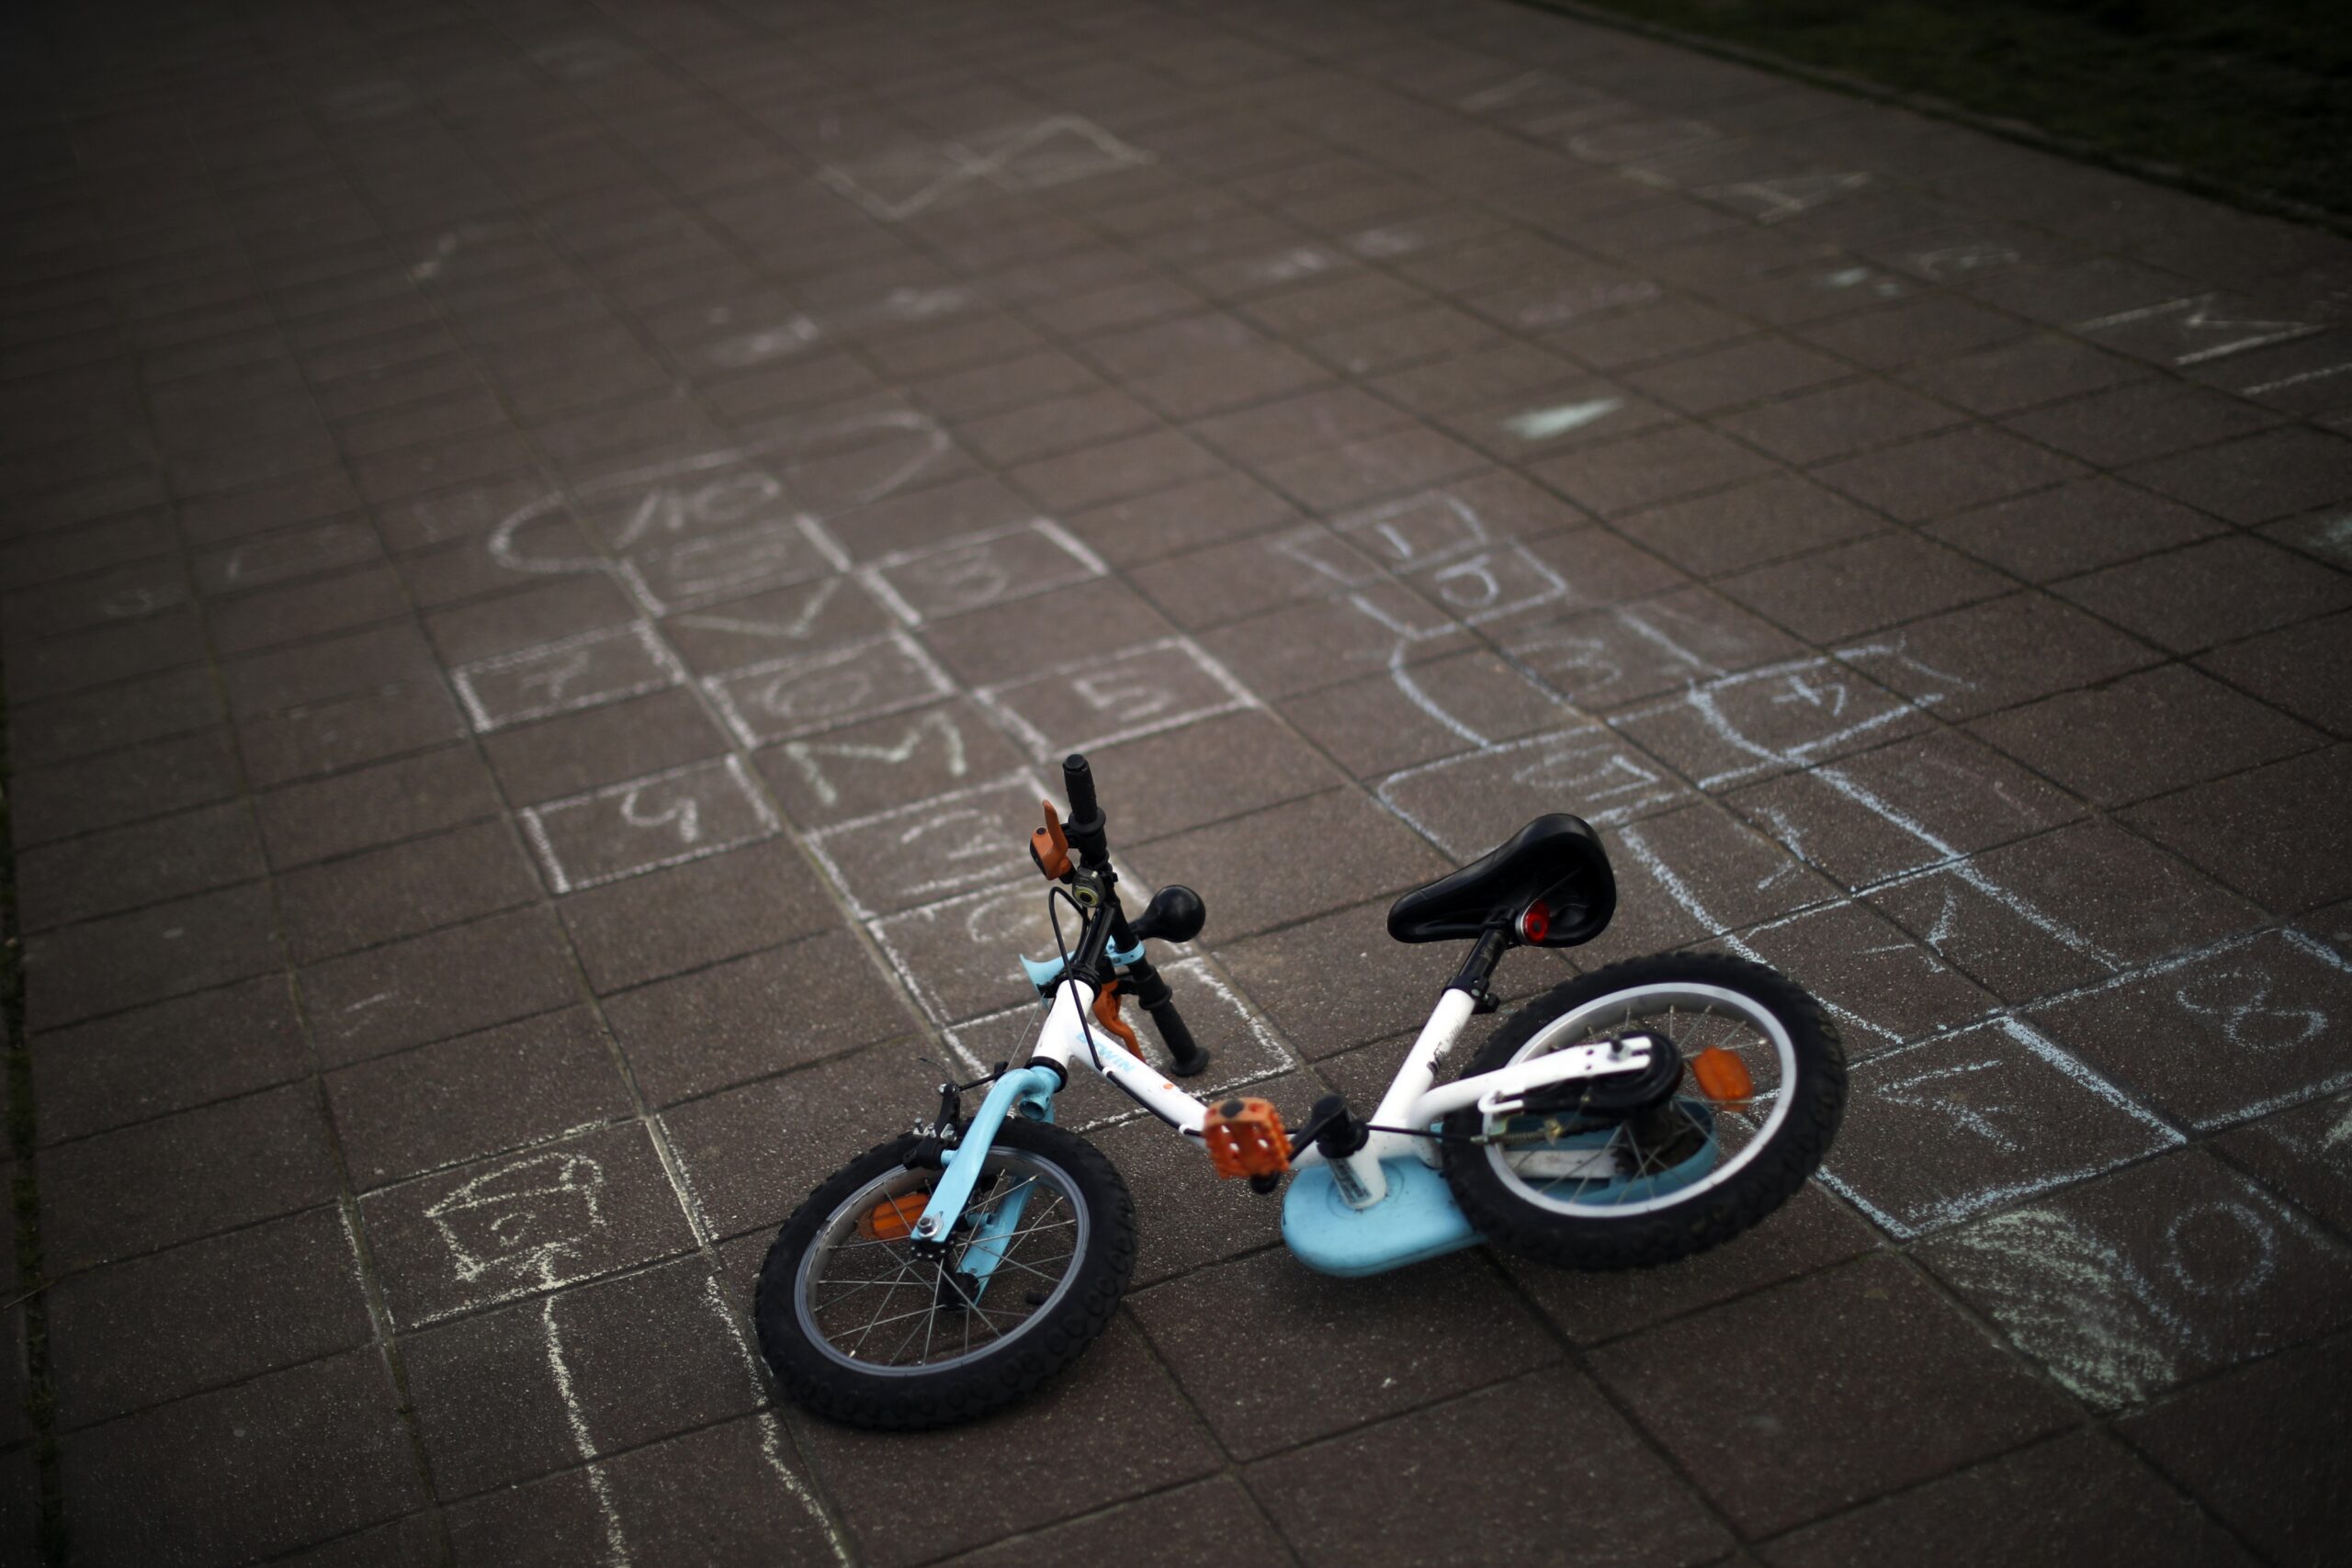 A child bicycle lies next to hopscotches sketched on the ground